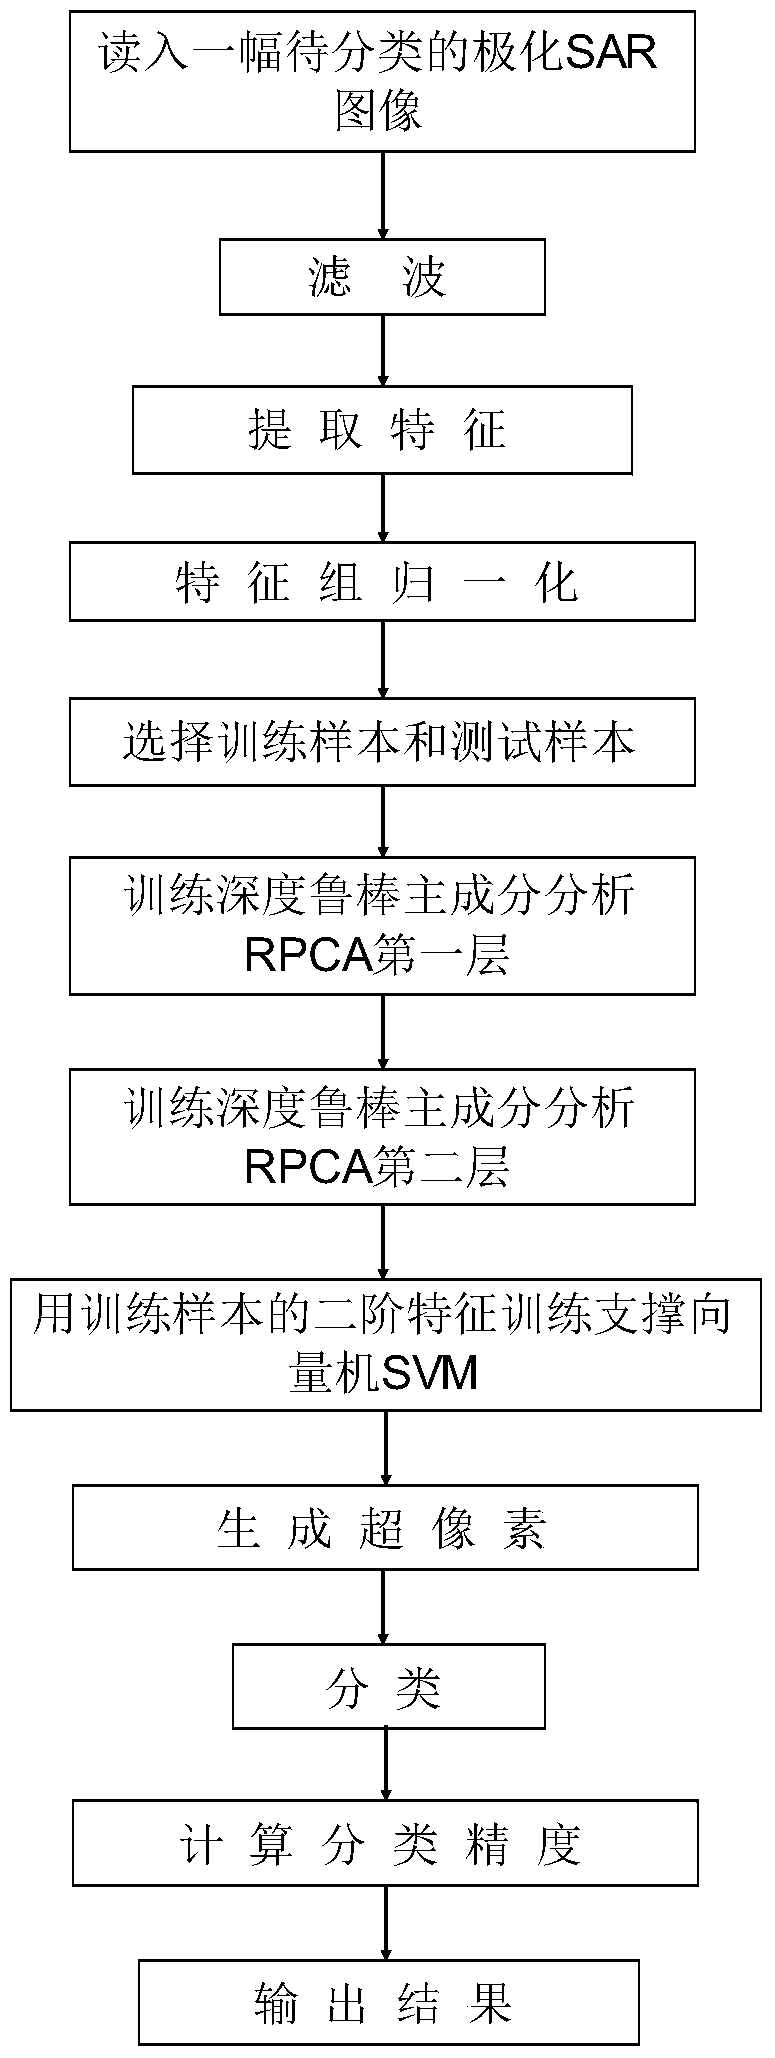 Classification Method of Polarization SAR Ground Objects Based on Depth RPCA